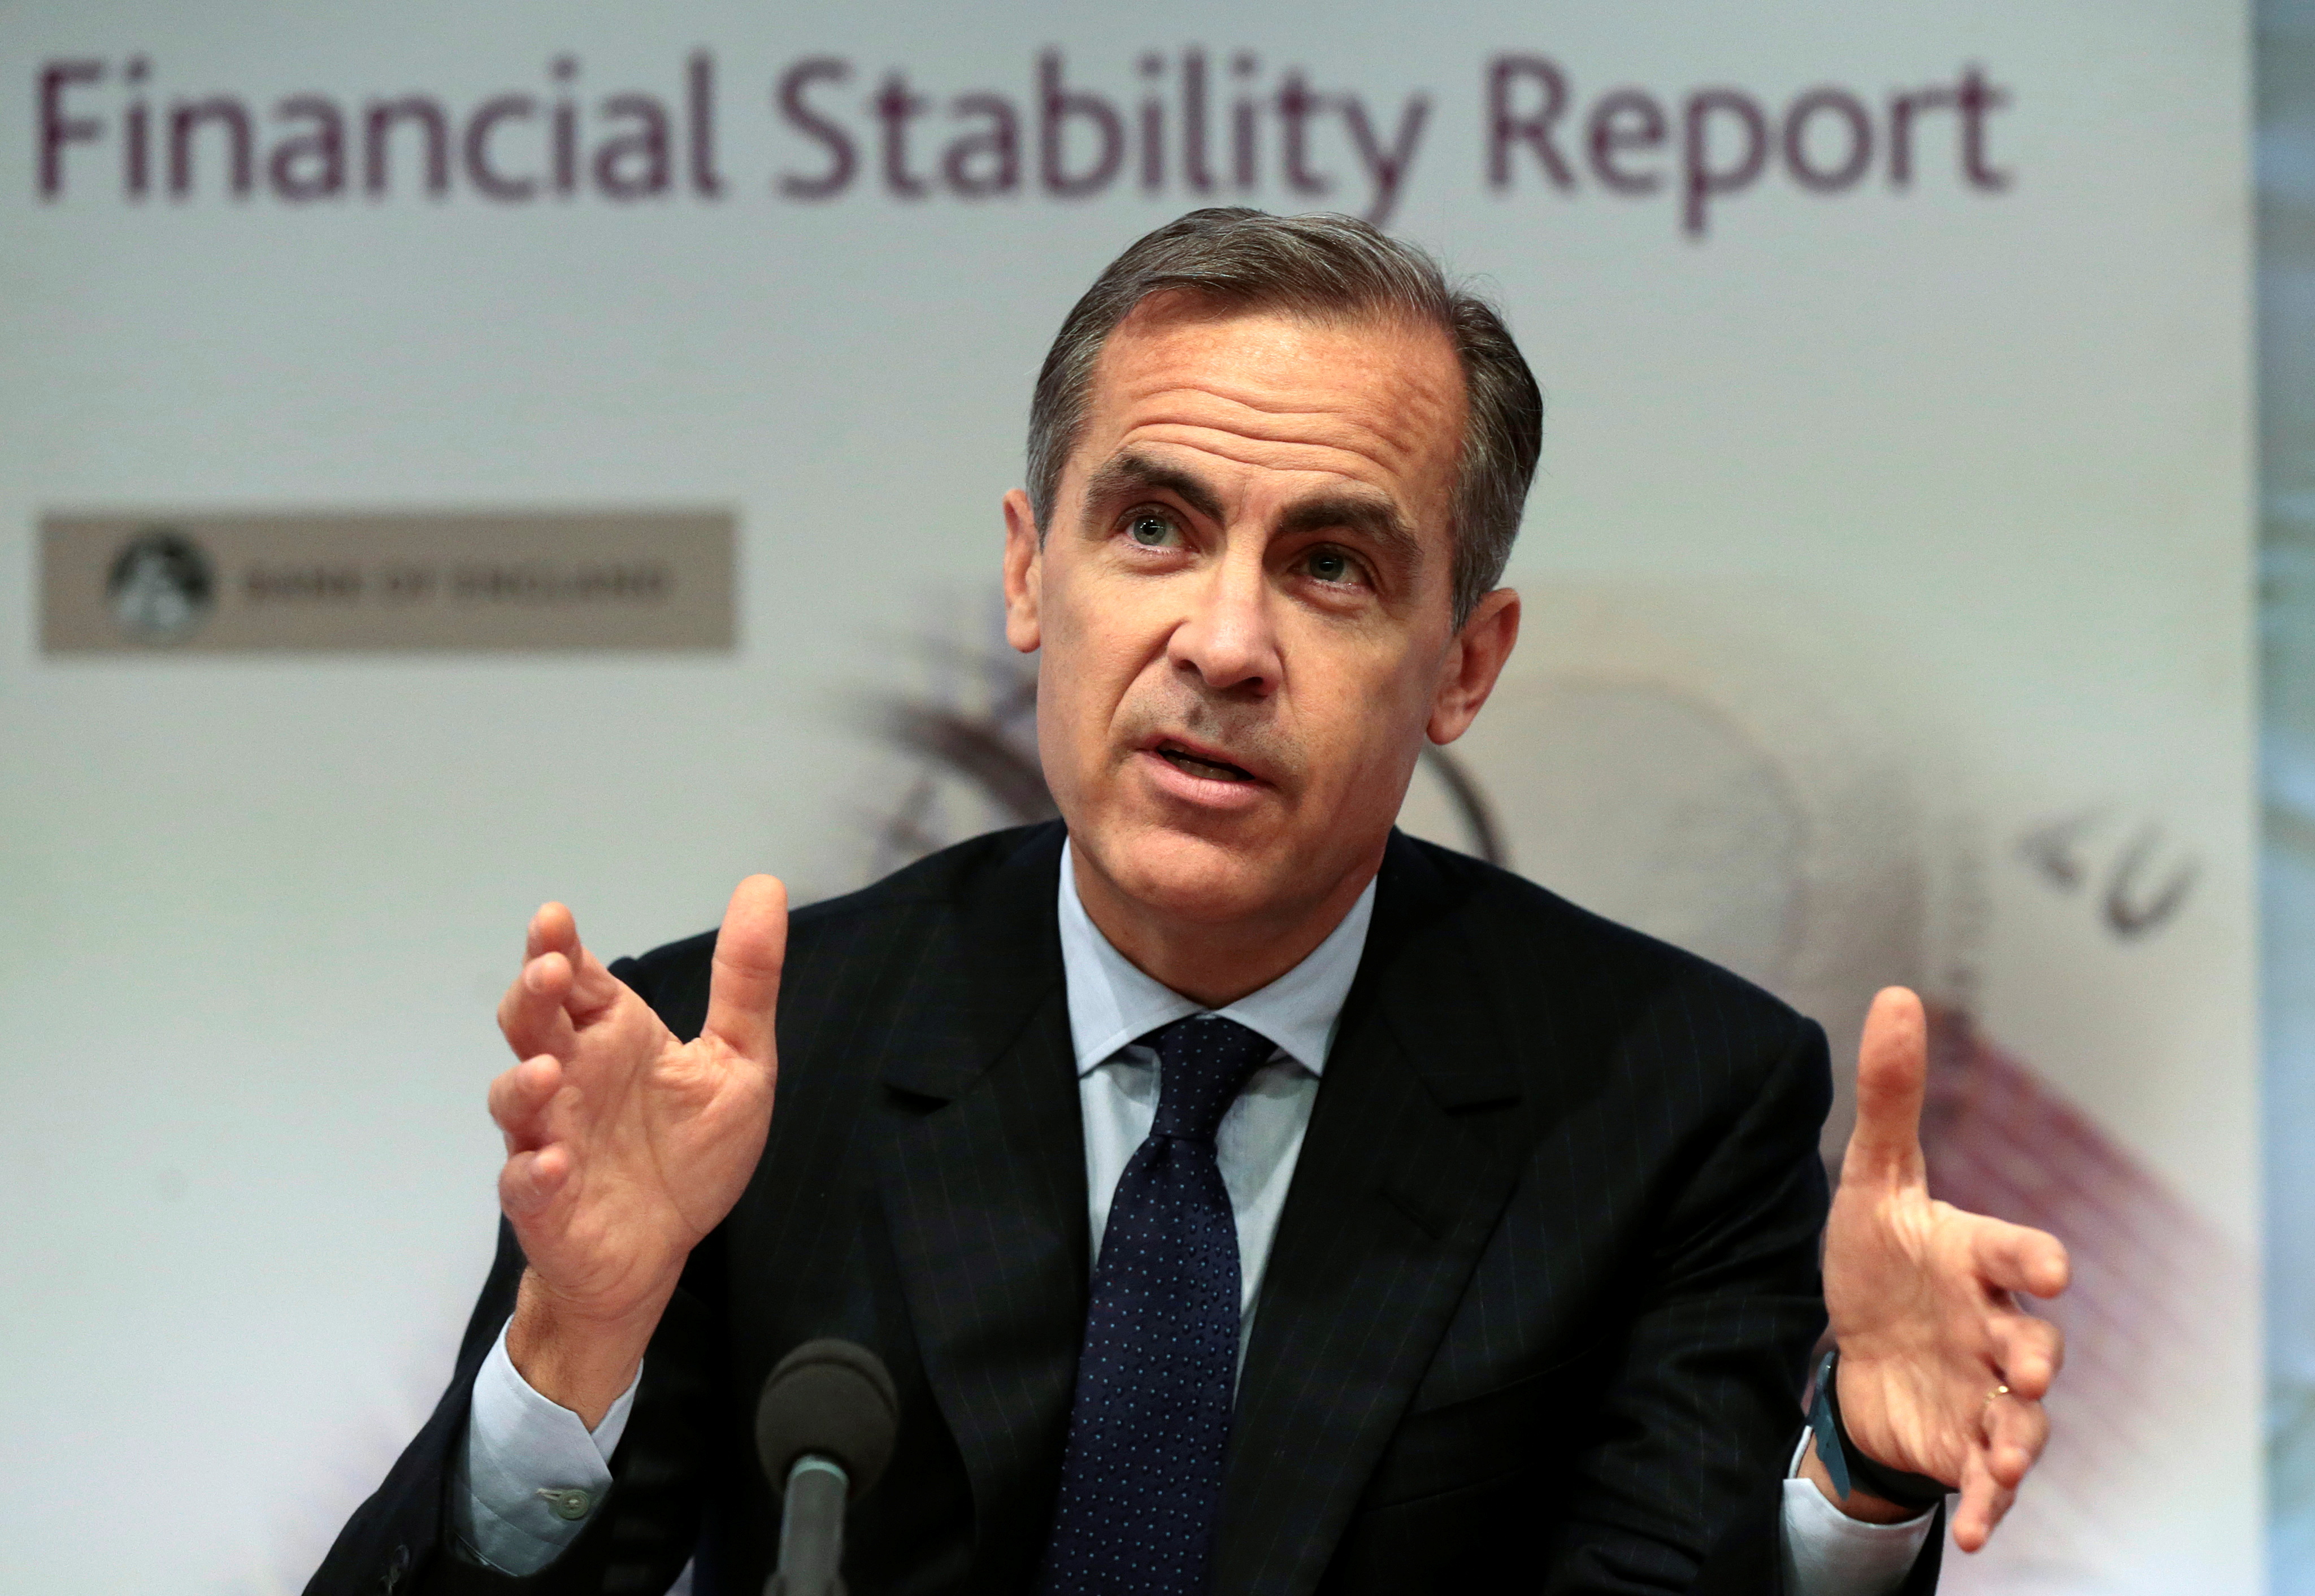 Bank of England governor Carney speaks during a news conference at the Bank of England in London